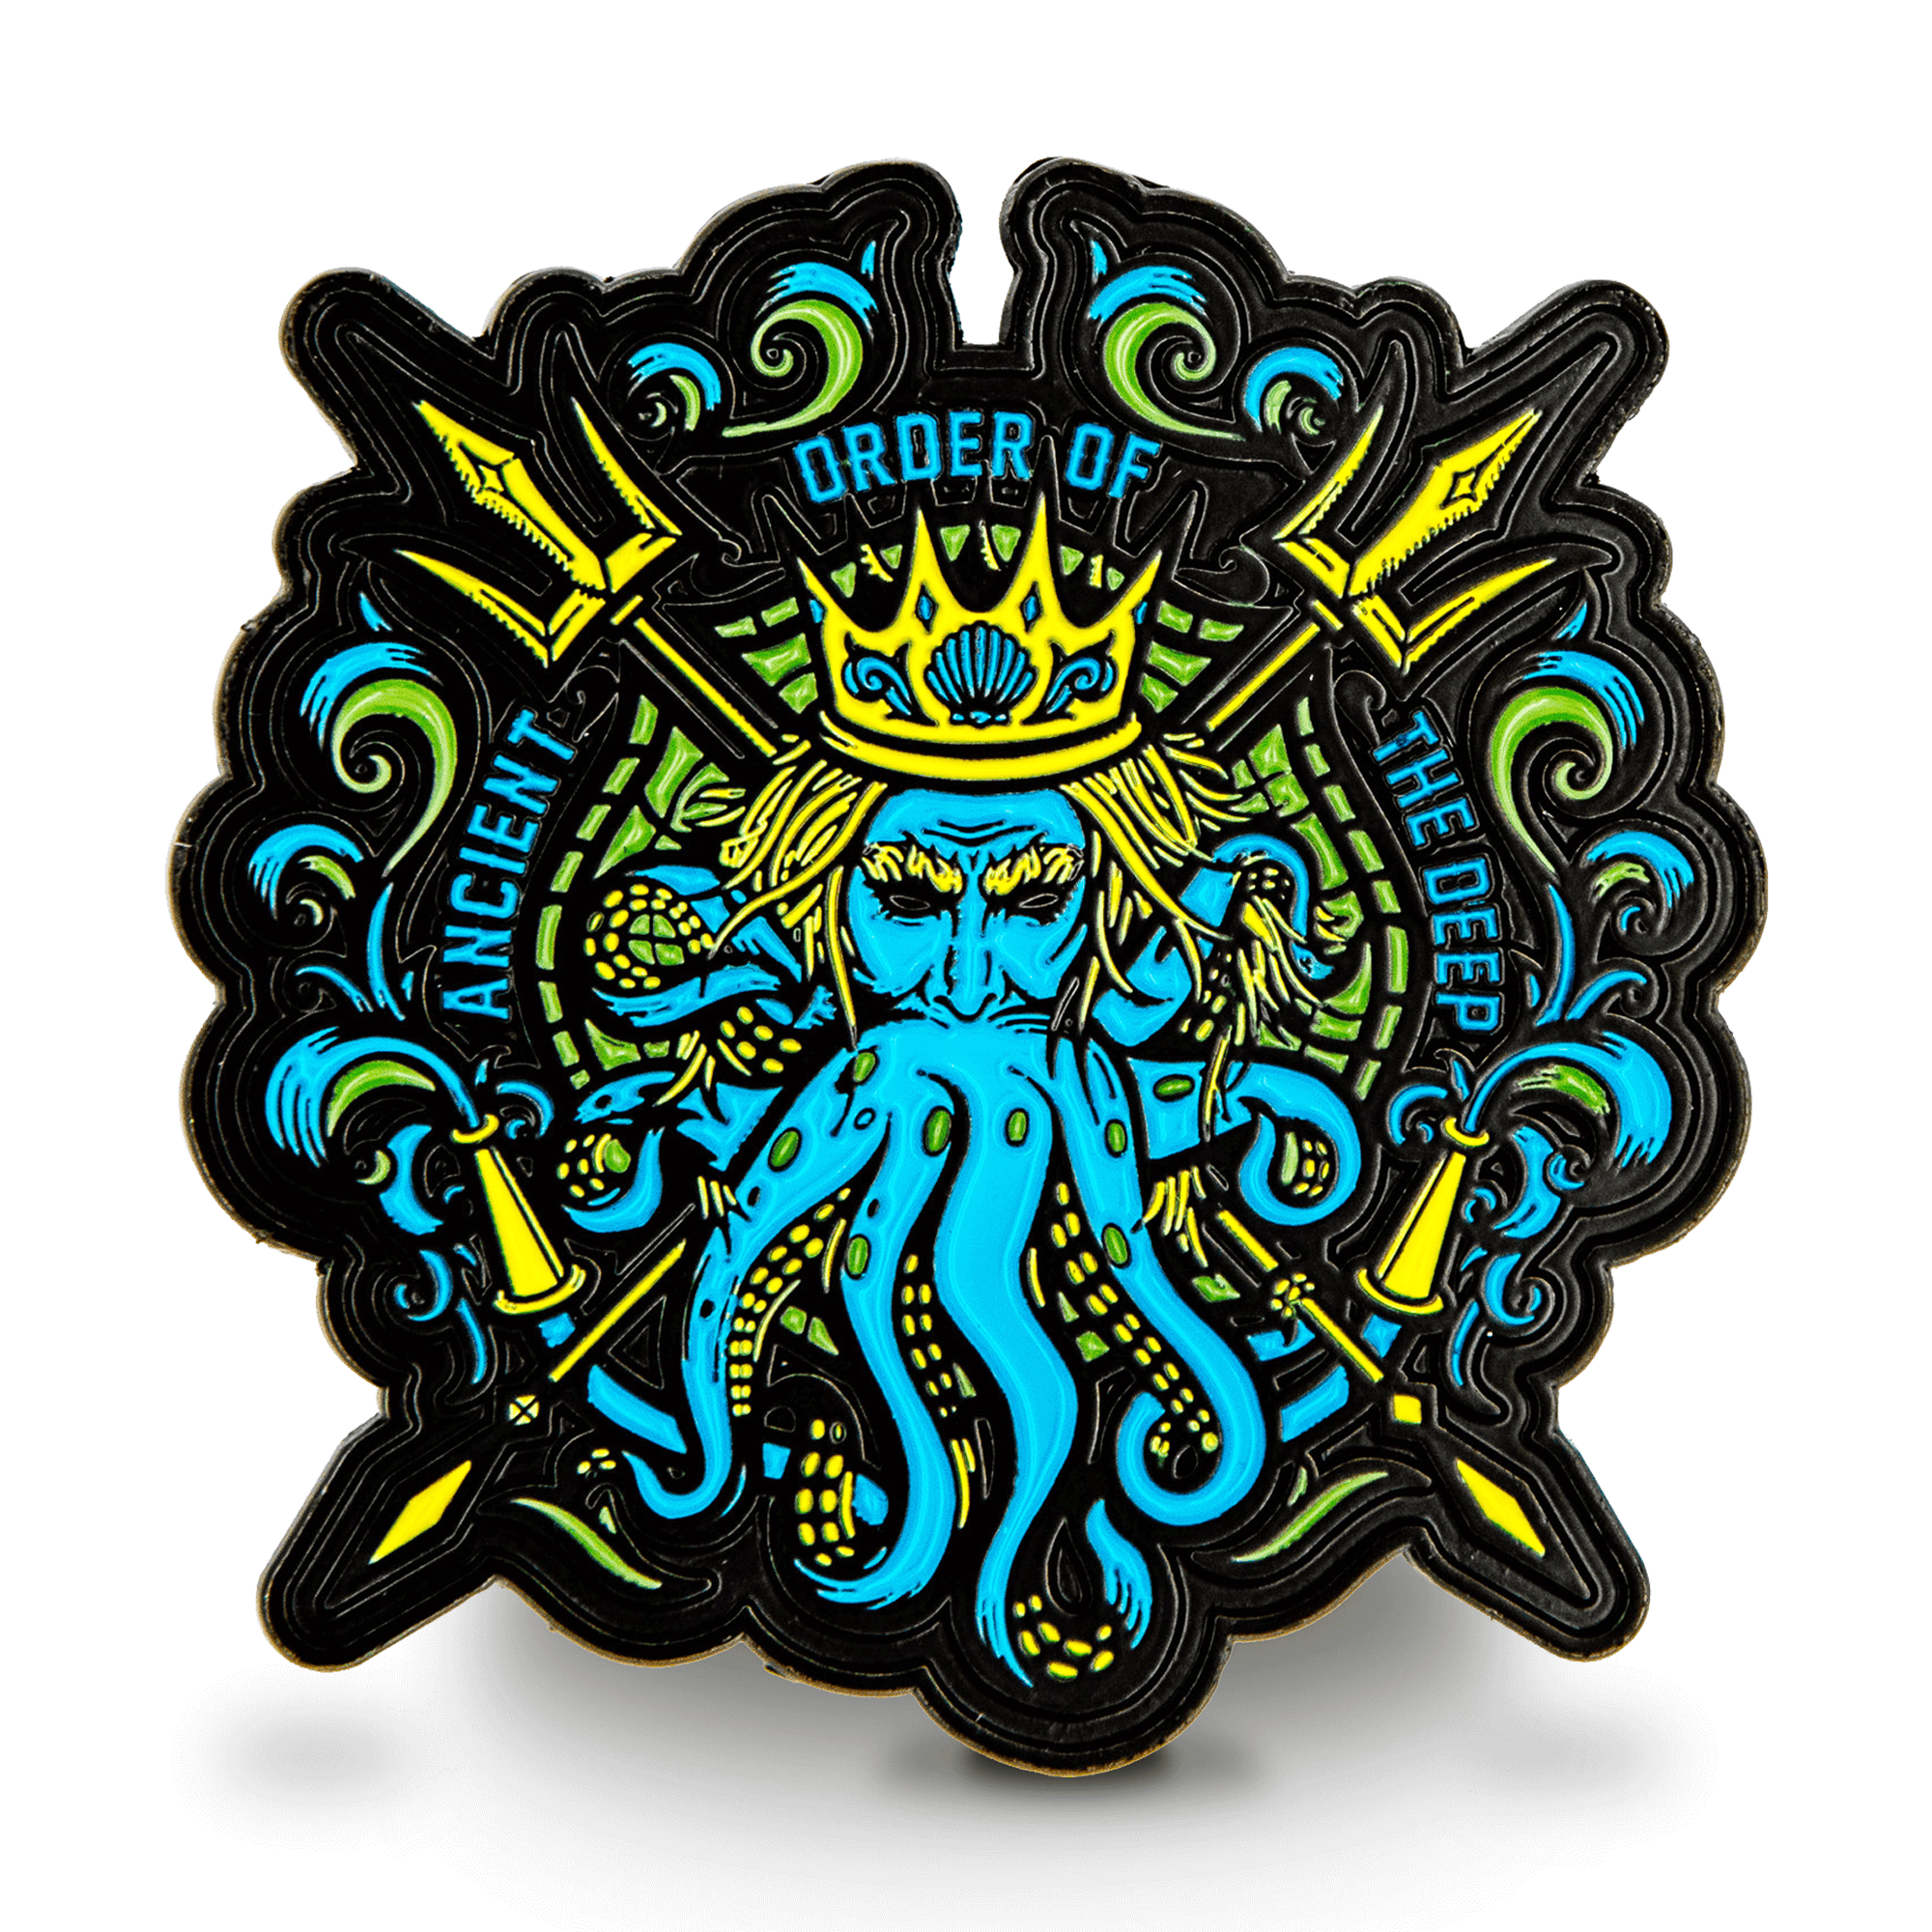 The Fire Department Coffee Shellback Challenge Coin featuring a blue octopus with a humanoid face wearing a crown and holding two tridents.